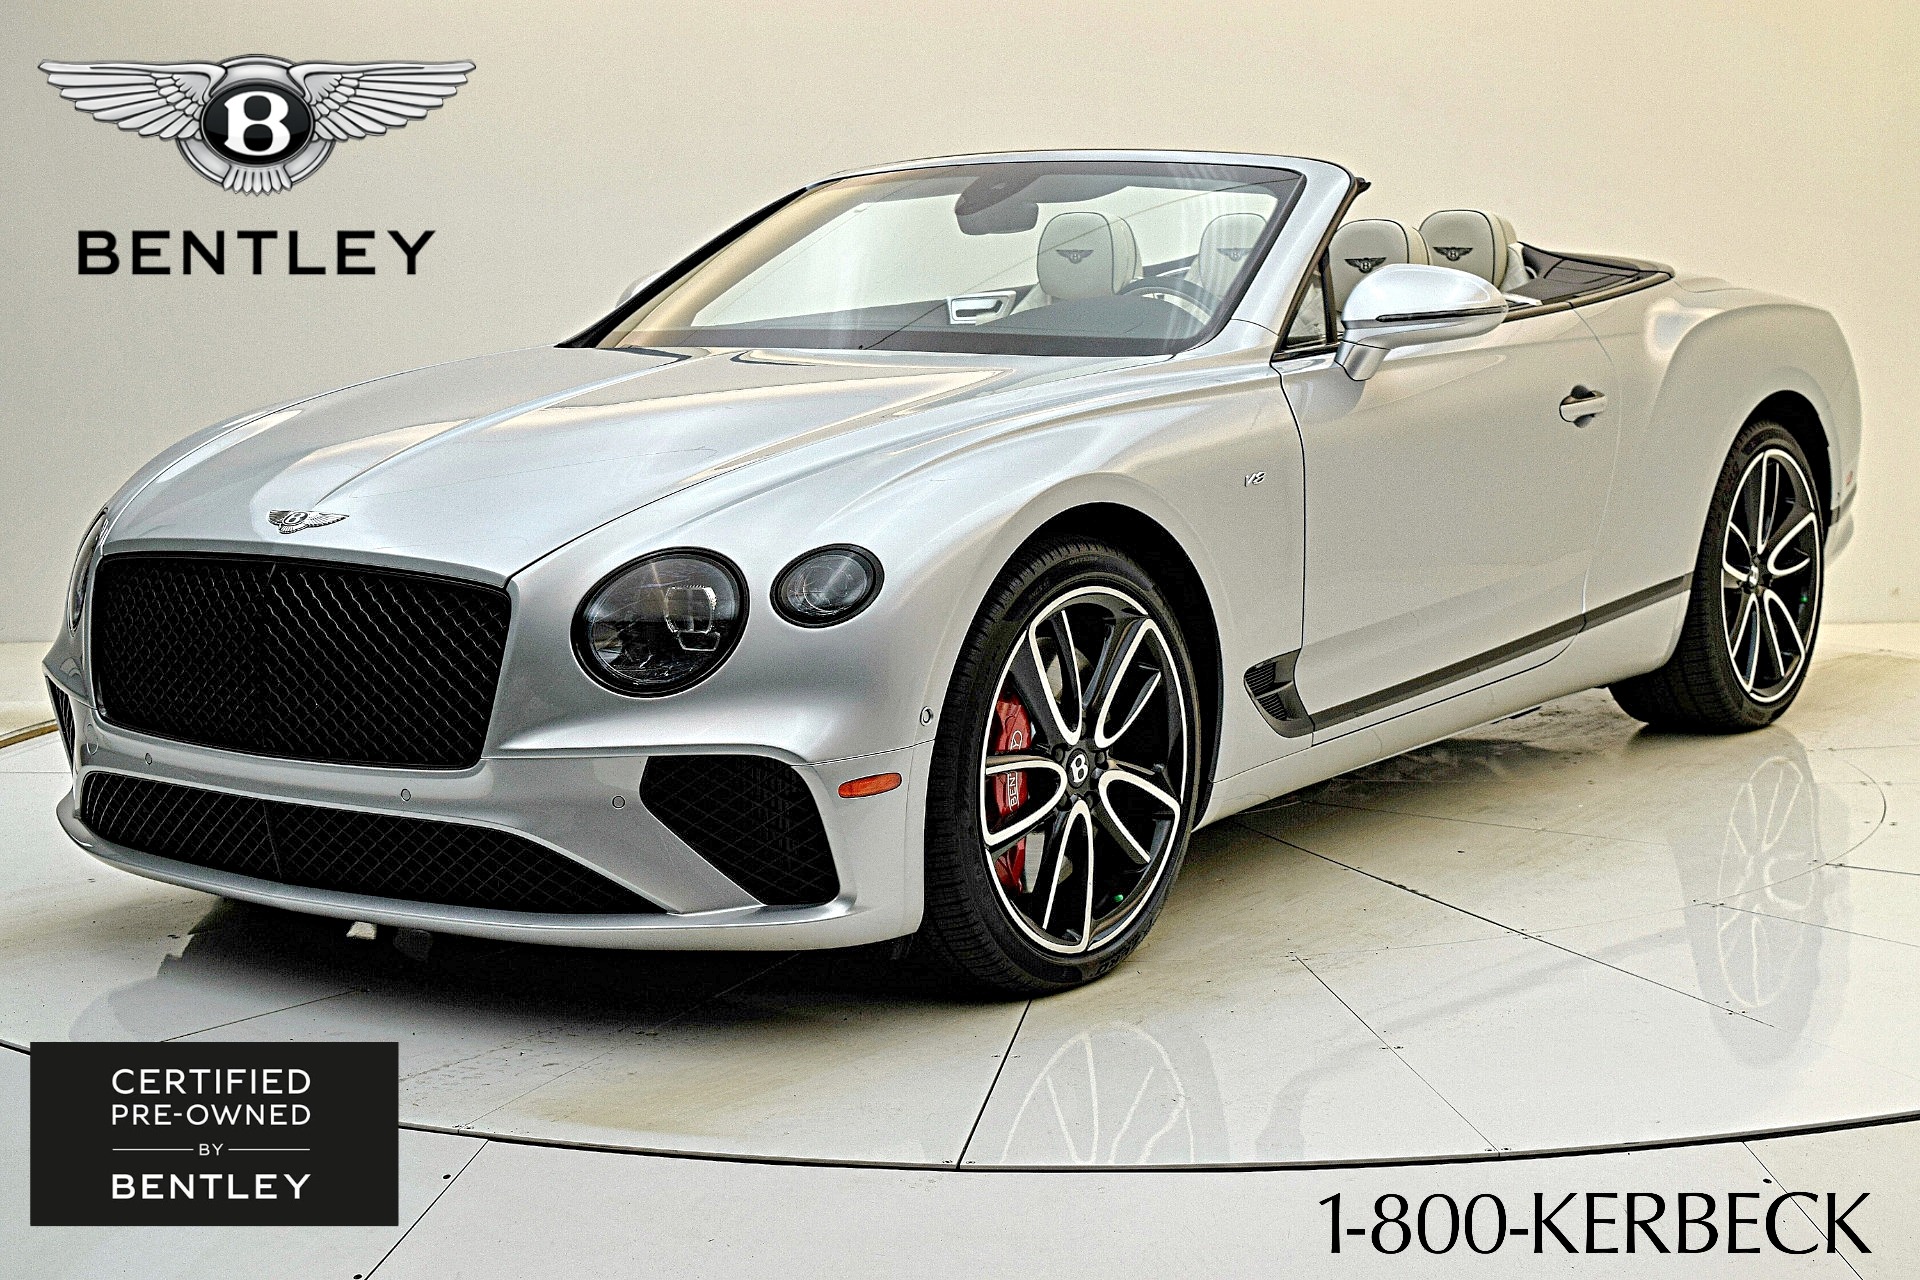 Used 2021 Bentley Continental V8 Convertible / LEASE OPTIONS AVAILABLE for sale $249,000 at Bentley Palmyra N.J. in Palmyra NJ 08065 2